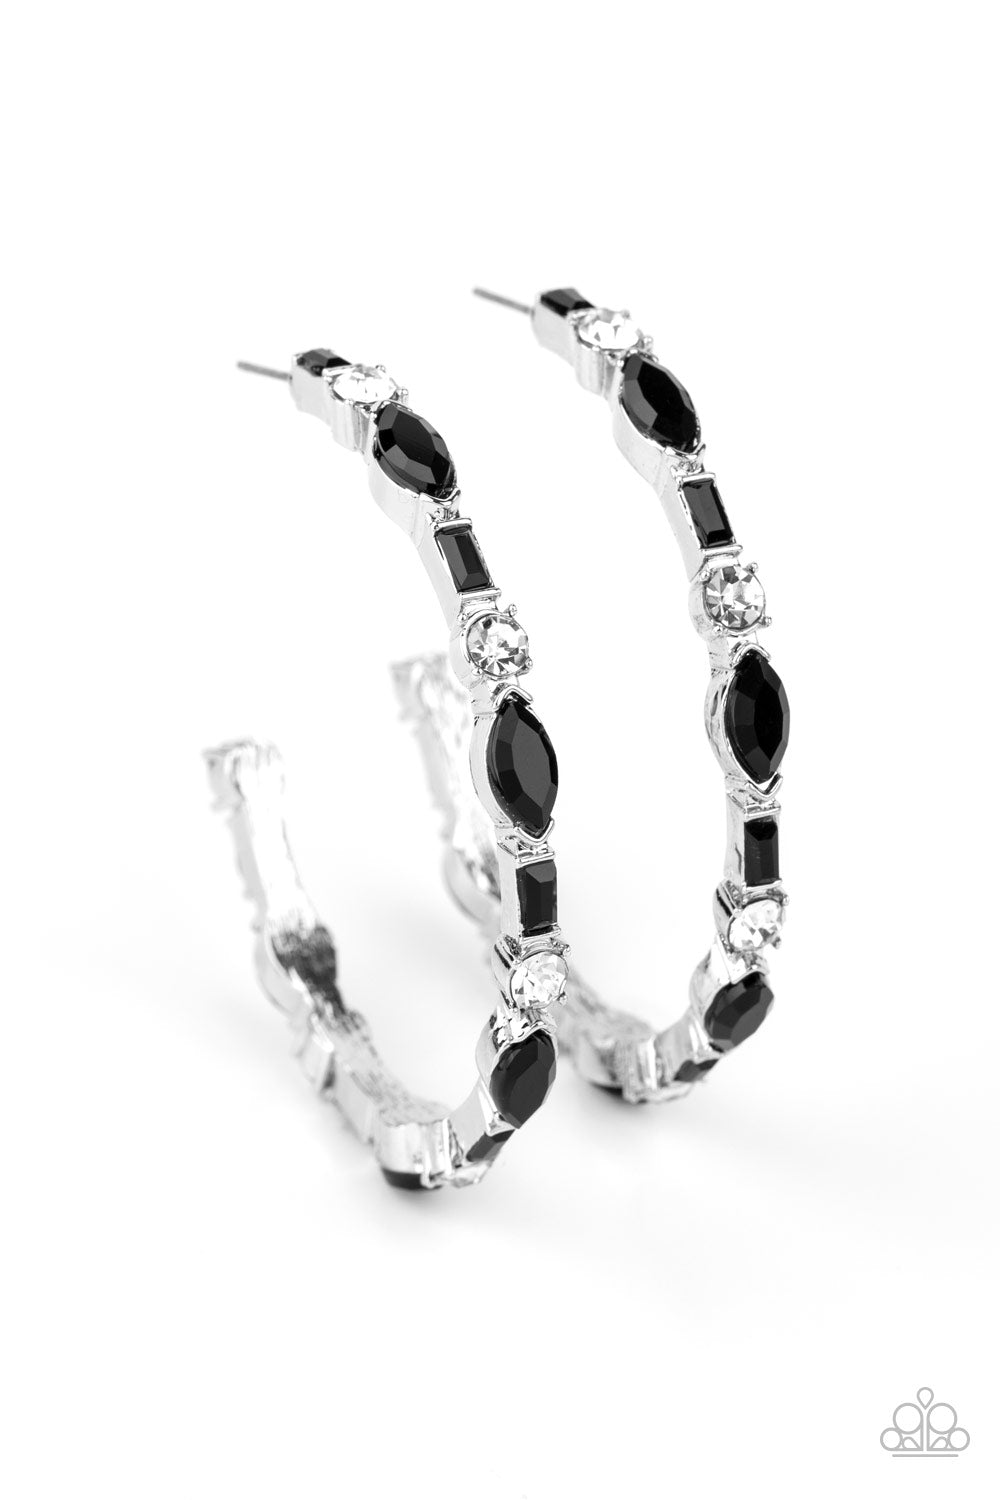 Featuring round, emerald, and marquise style cuts, a glittery collection of black and white rhinestones coalesce into a sparkly hoop for a glamorous finish. Earring attaches to a standard post fitting. Hoop measures approximately 2